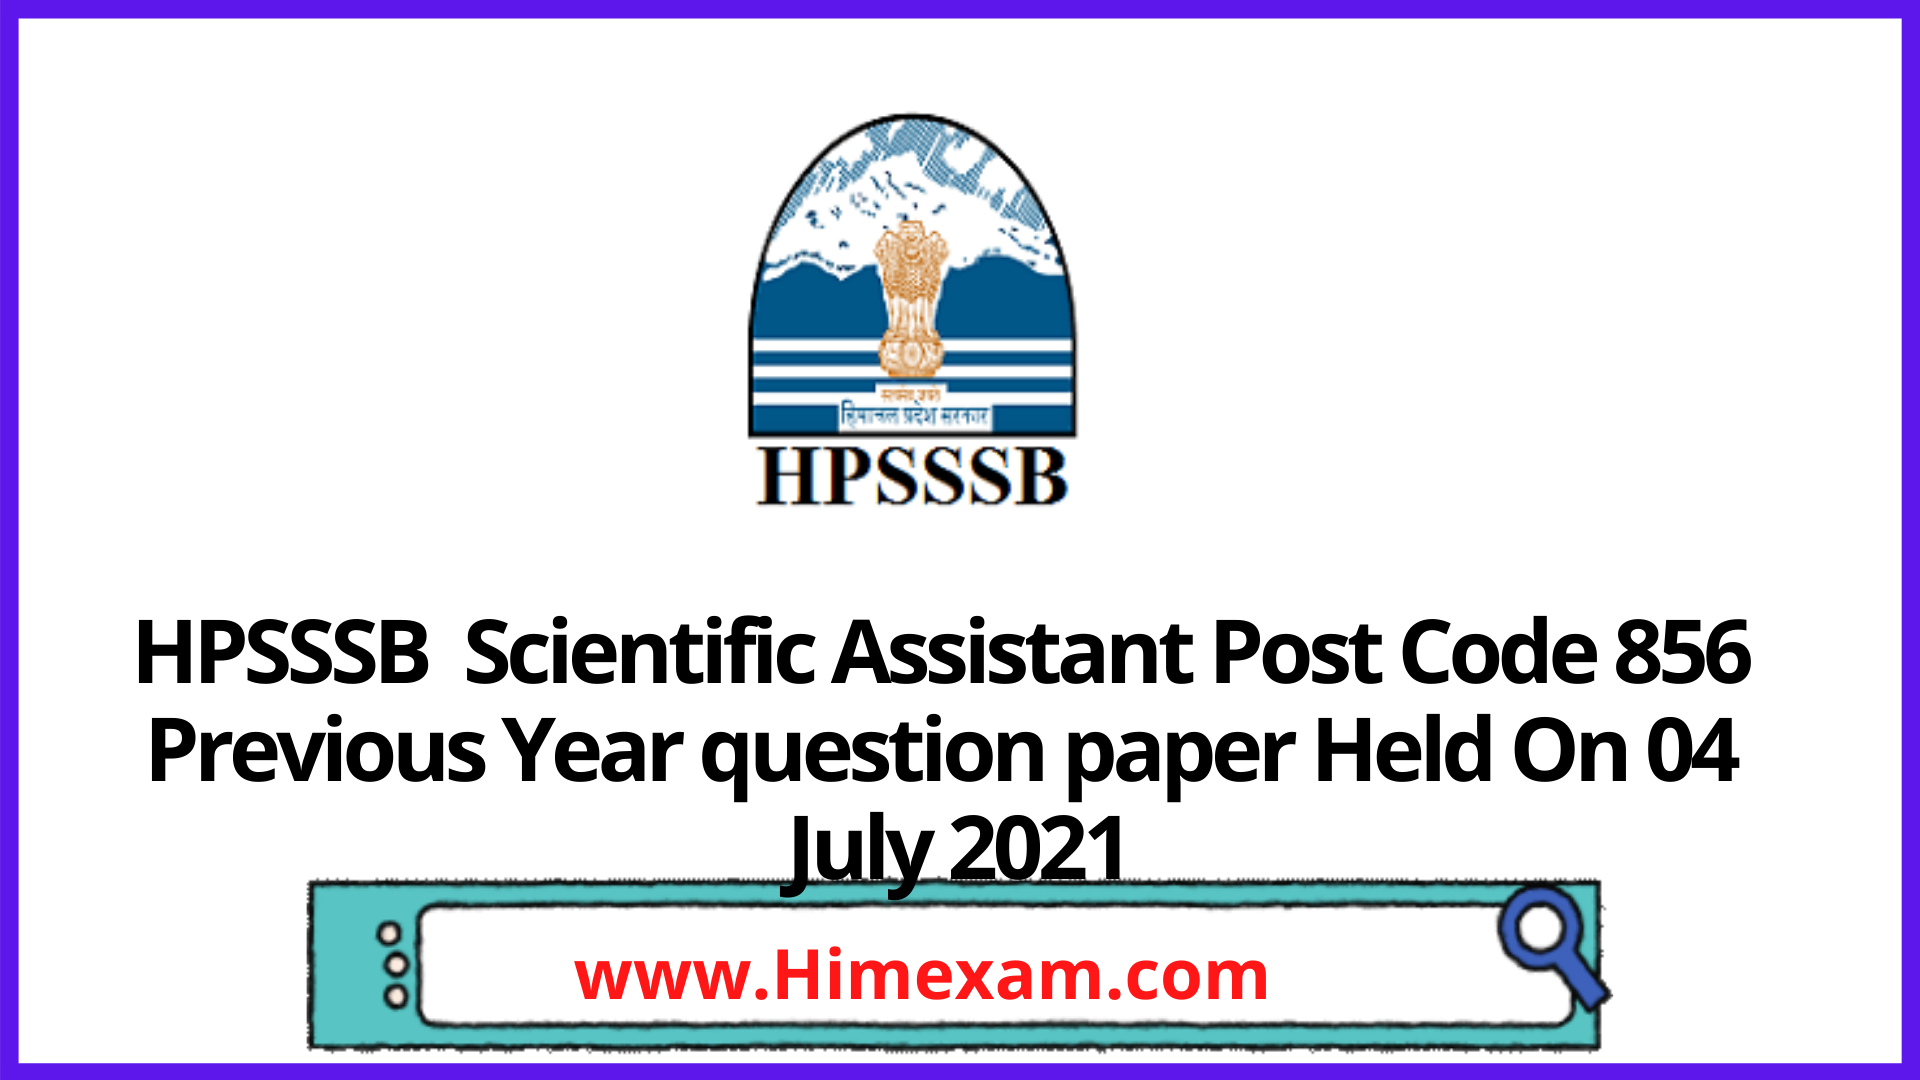 HPSSSB  Scientific Assistant Post Code 856  Previous Year question paper Held On 04  July 2021